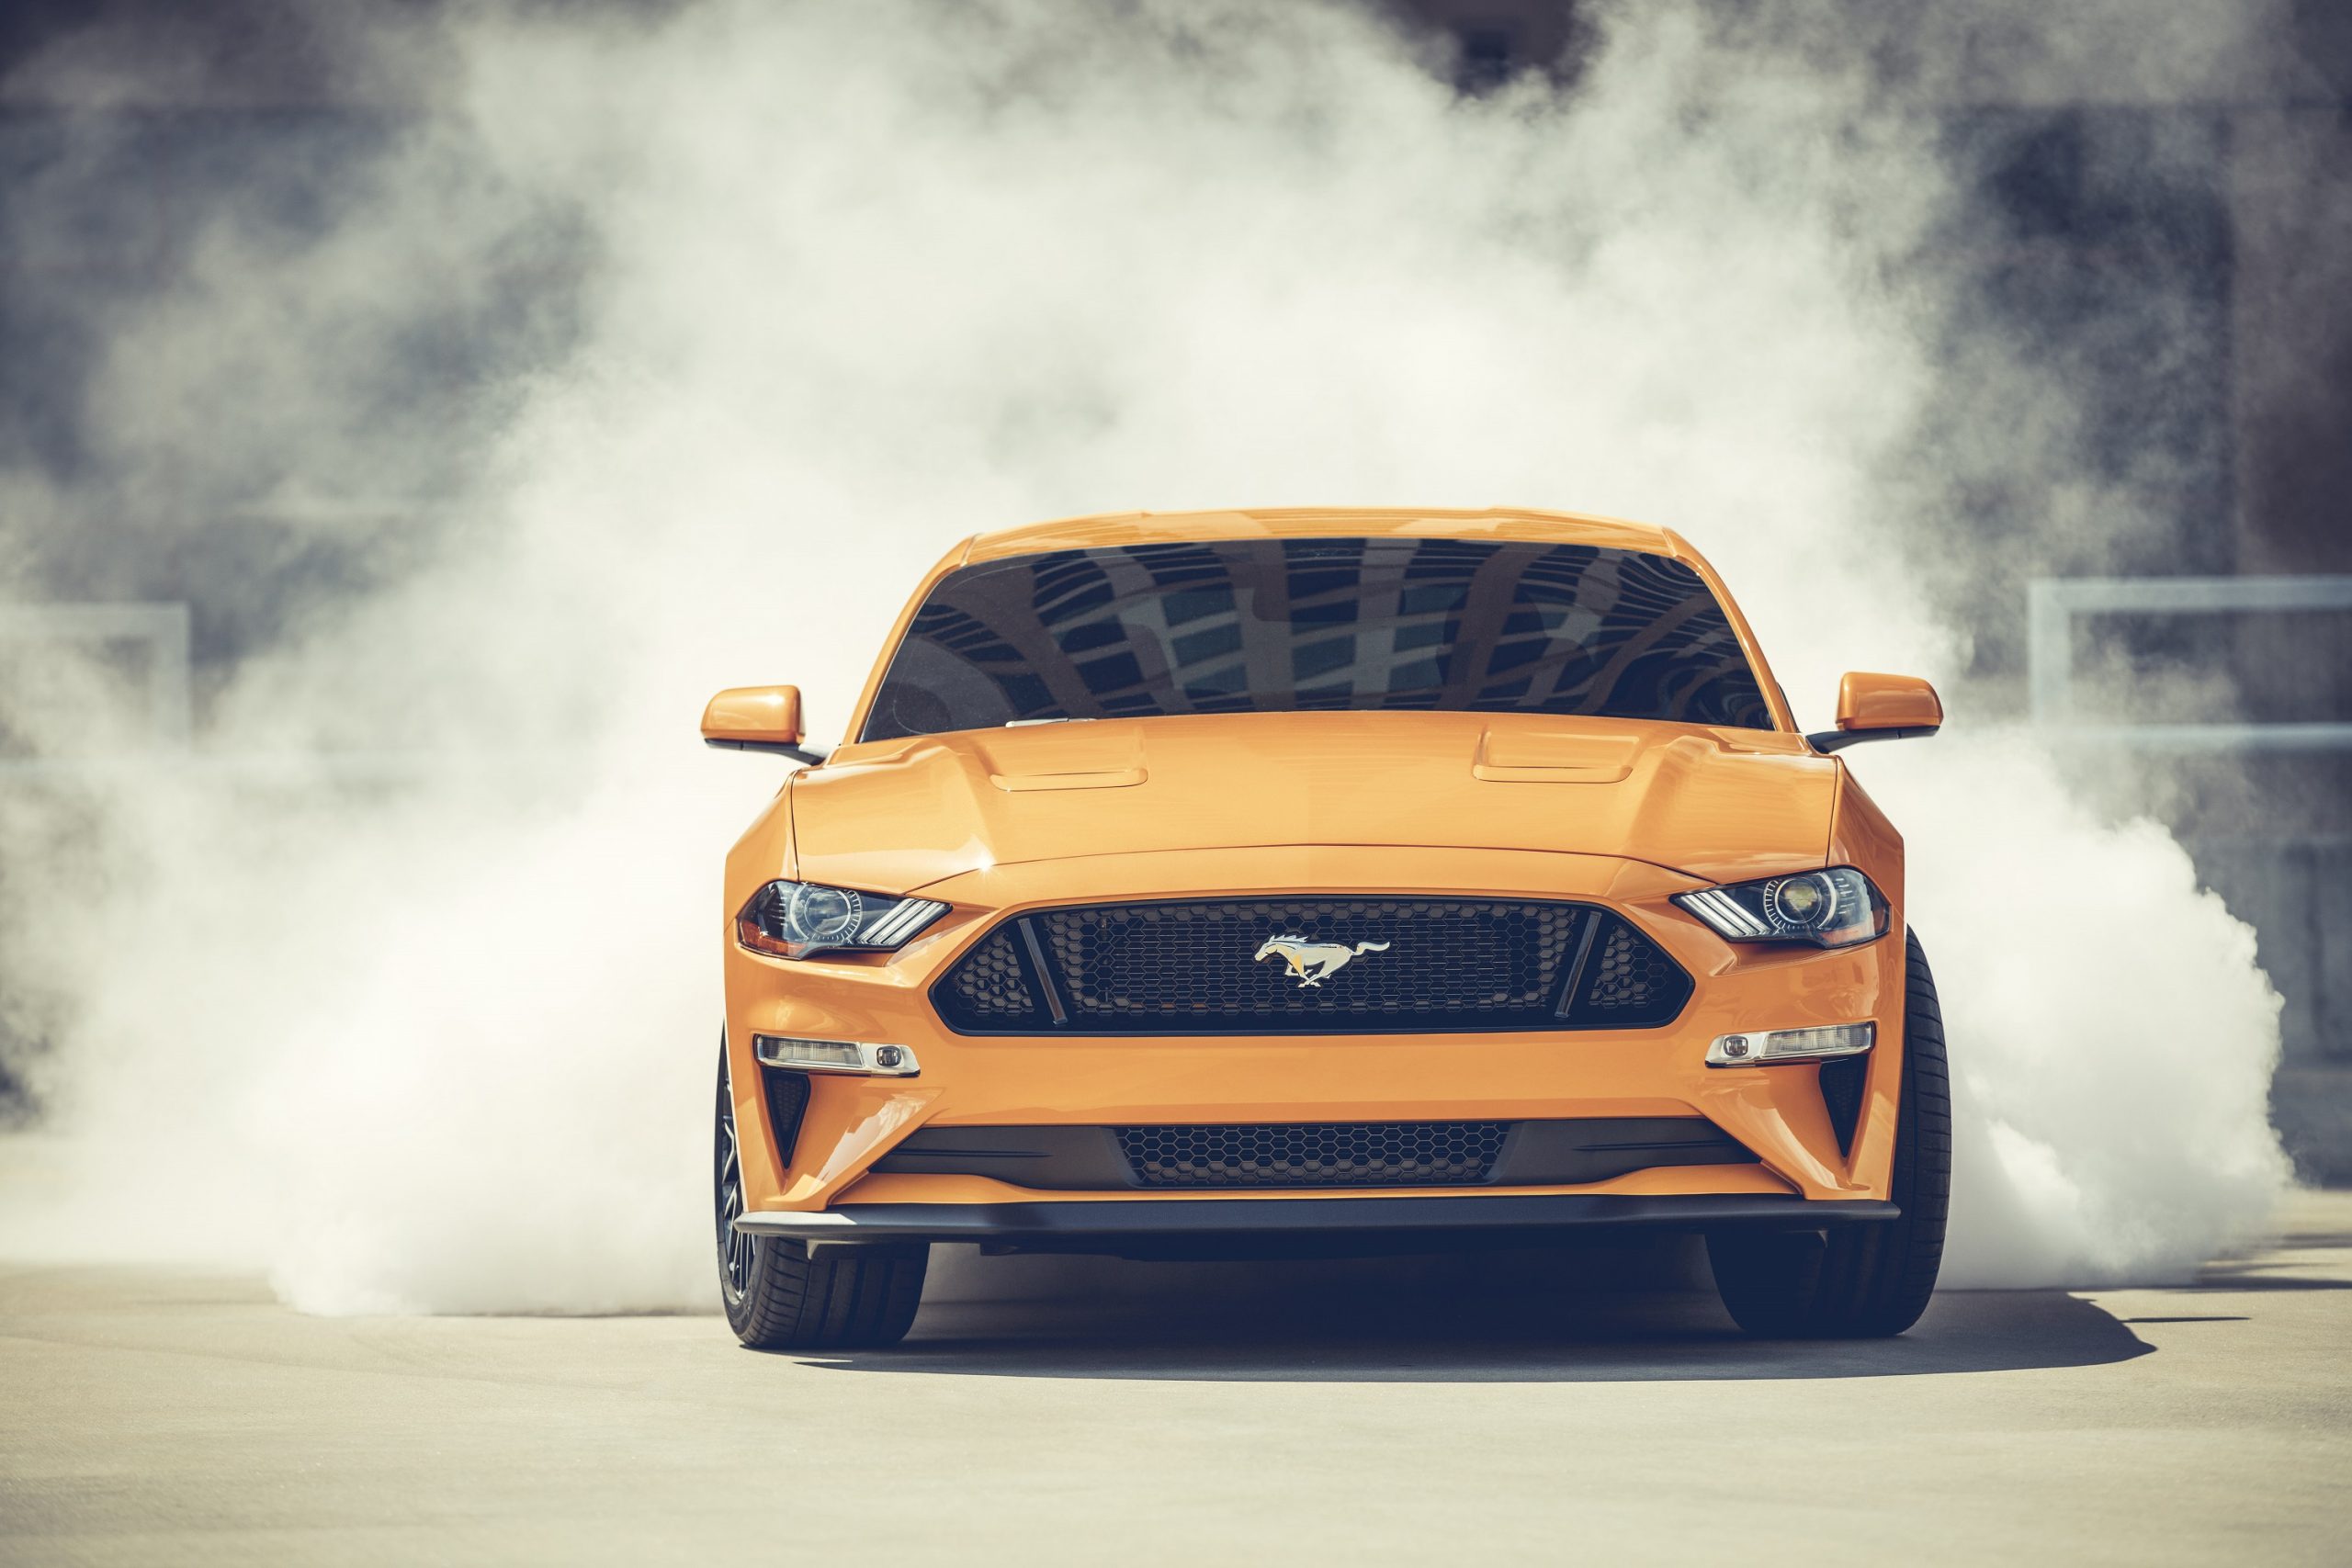 An orange Ford Mustang sports car mid-burnout shot from the front